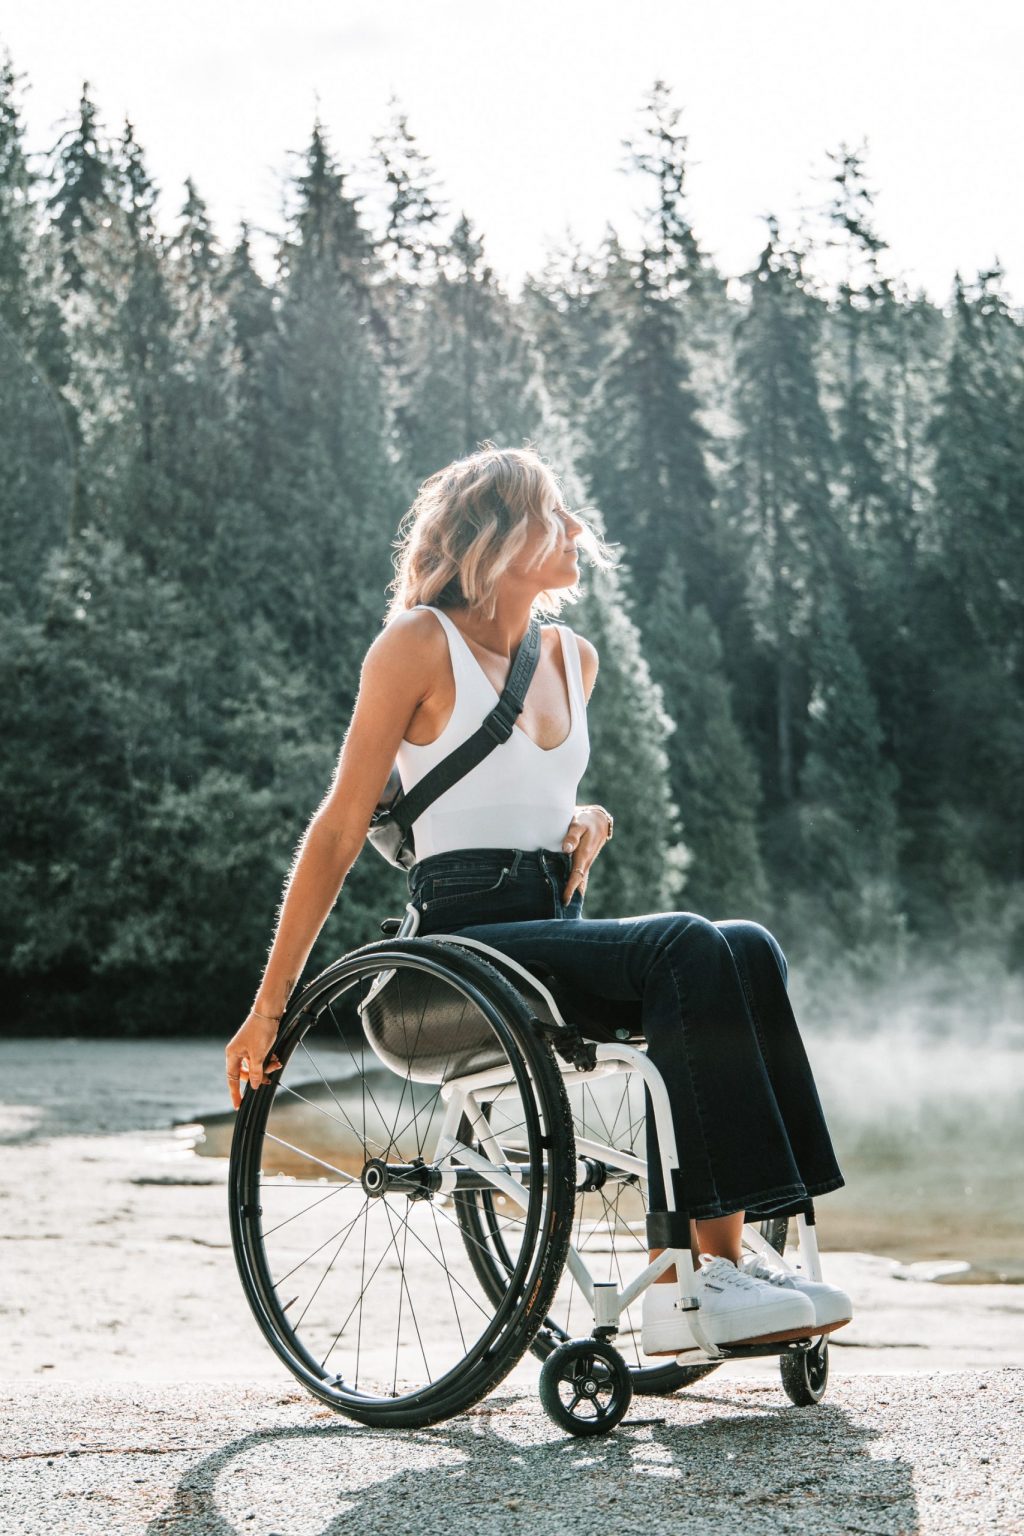 Fashion designers with disabilities